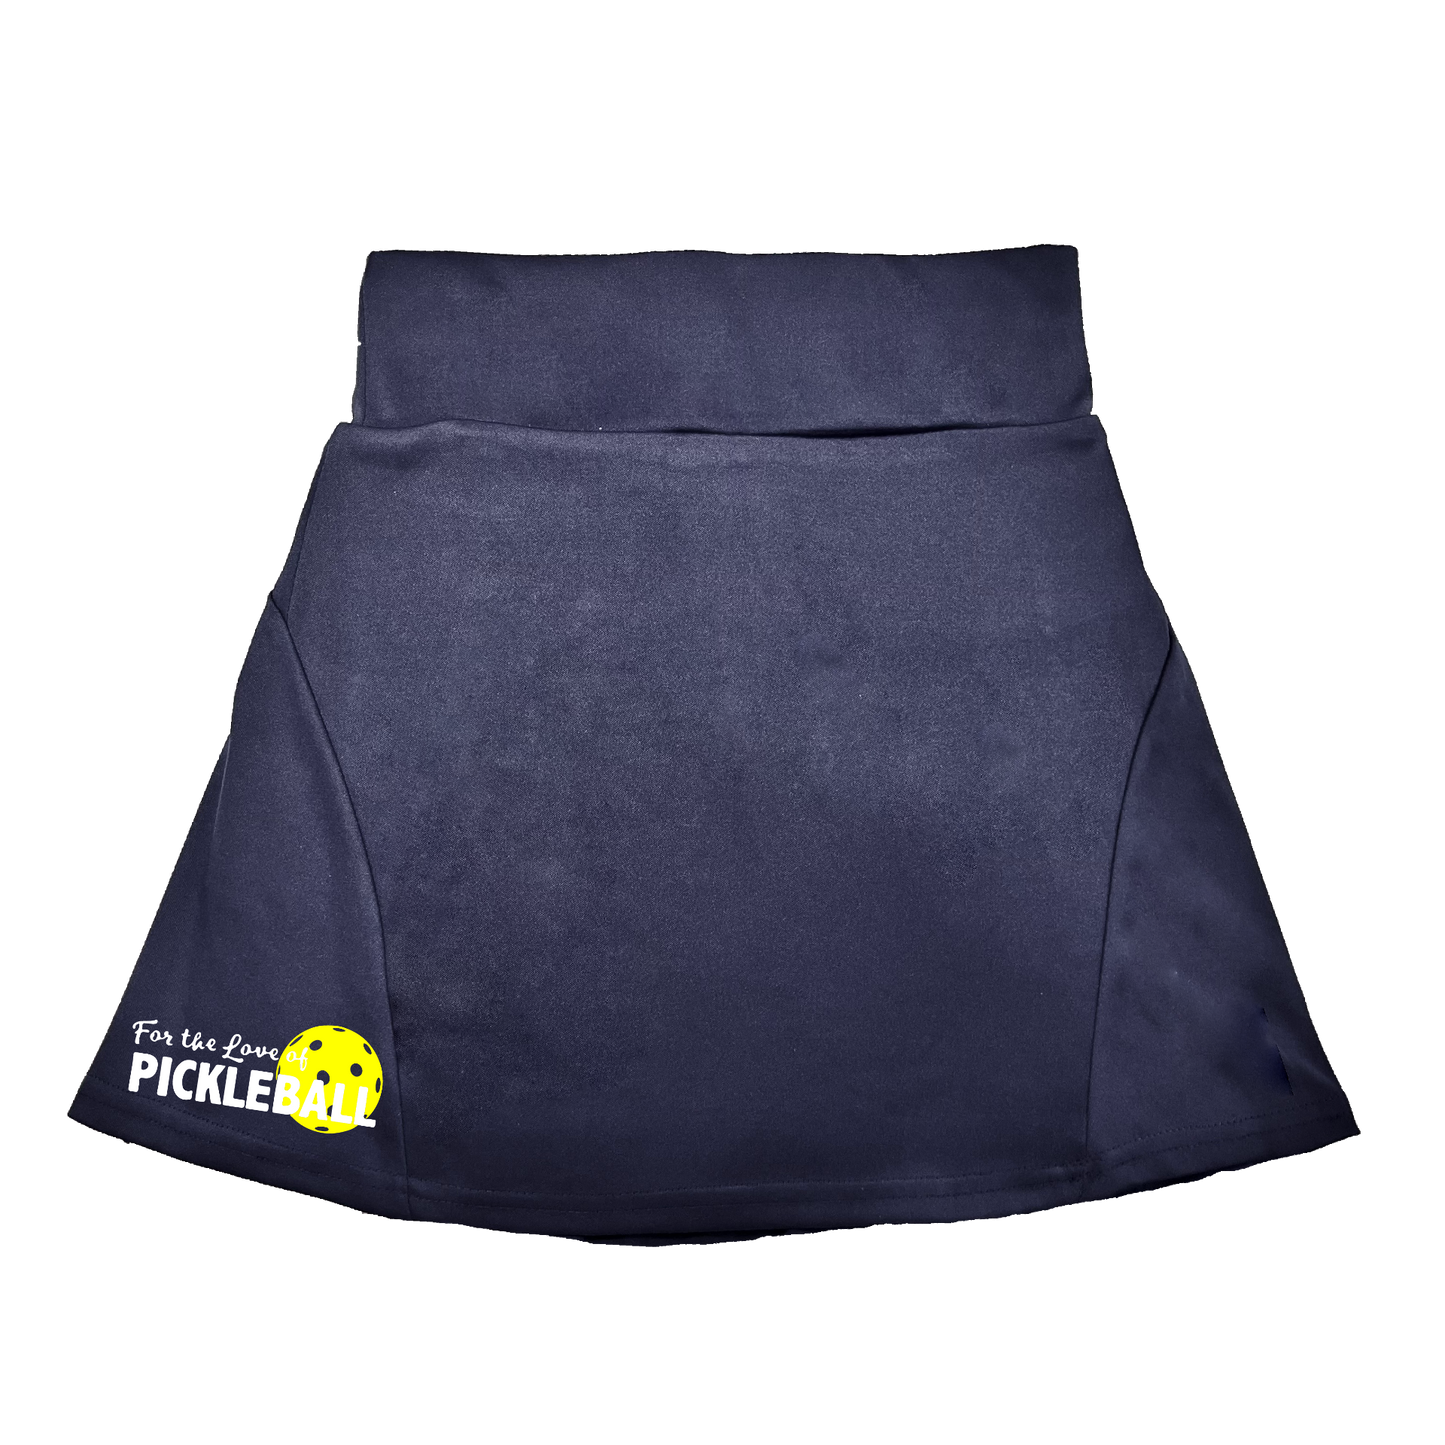 Pickleball Flirty Skort Design:  For The Love of Pickleball   These flirty skorts have a flat mid-rise waistband with a 3 inch waistband.  Light weight without being see through and the material wicks away moisture quickly.  Flirty pleats in the back with inner shorts for free movement and stylish coverage on the courts.  A functional zipper pocket on the back and two built in pockets on the shorts for convenient storage. 